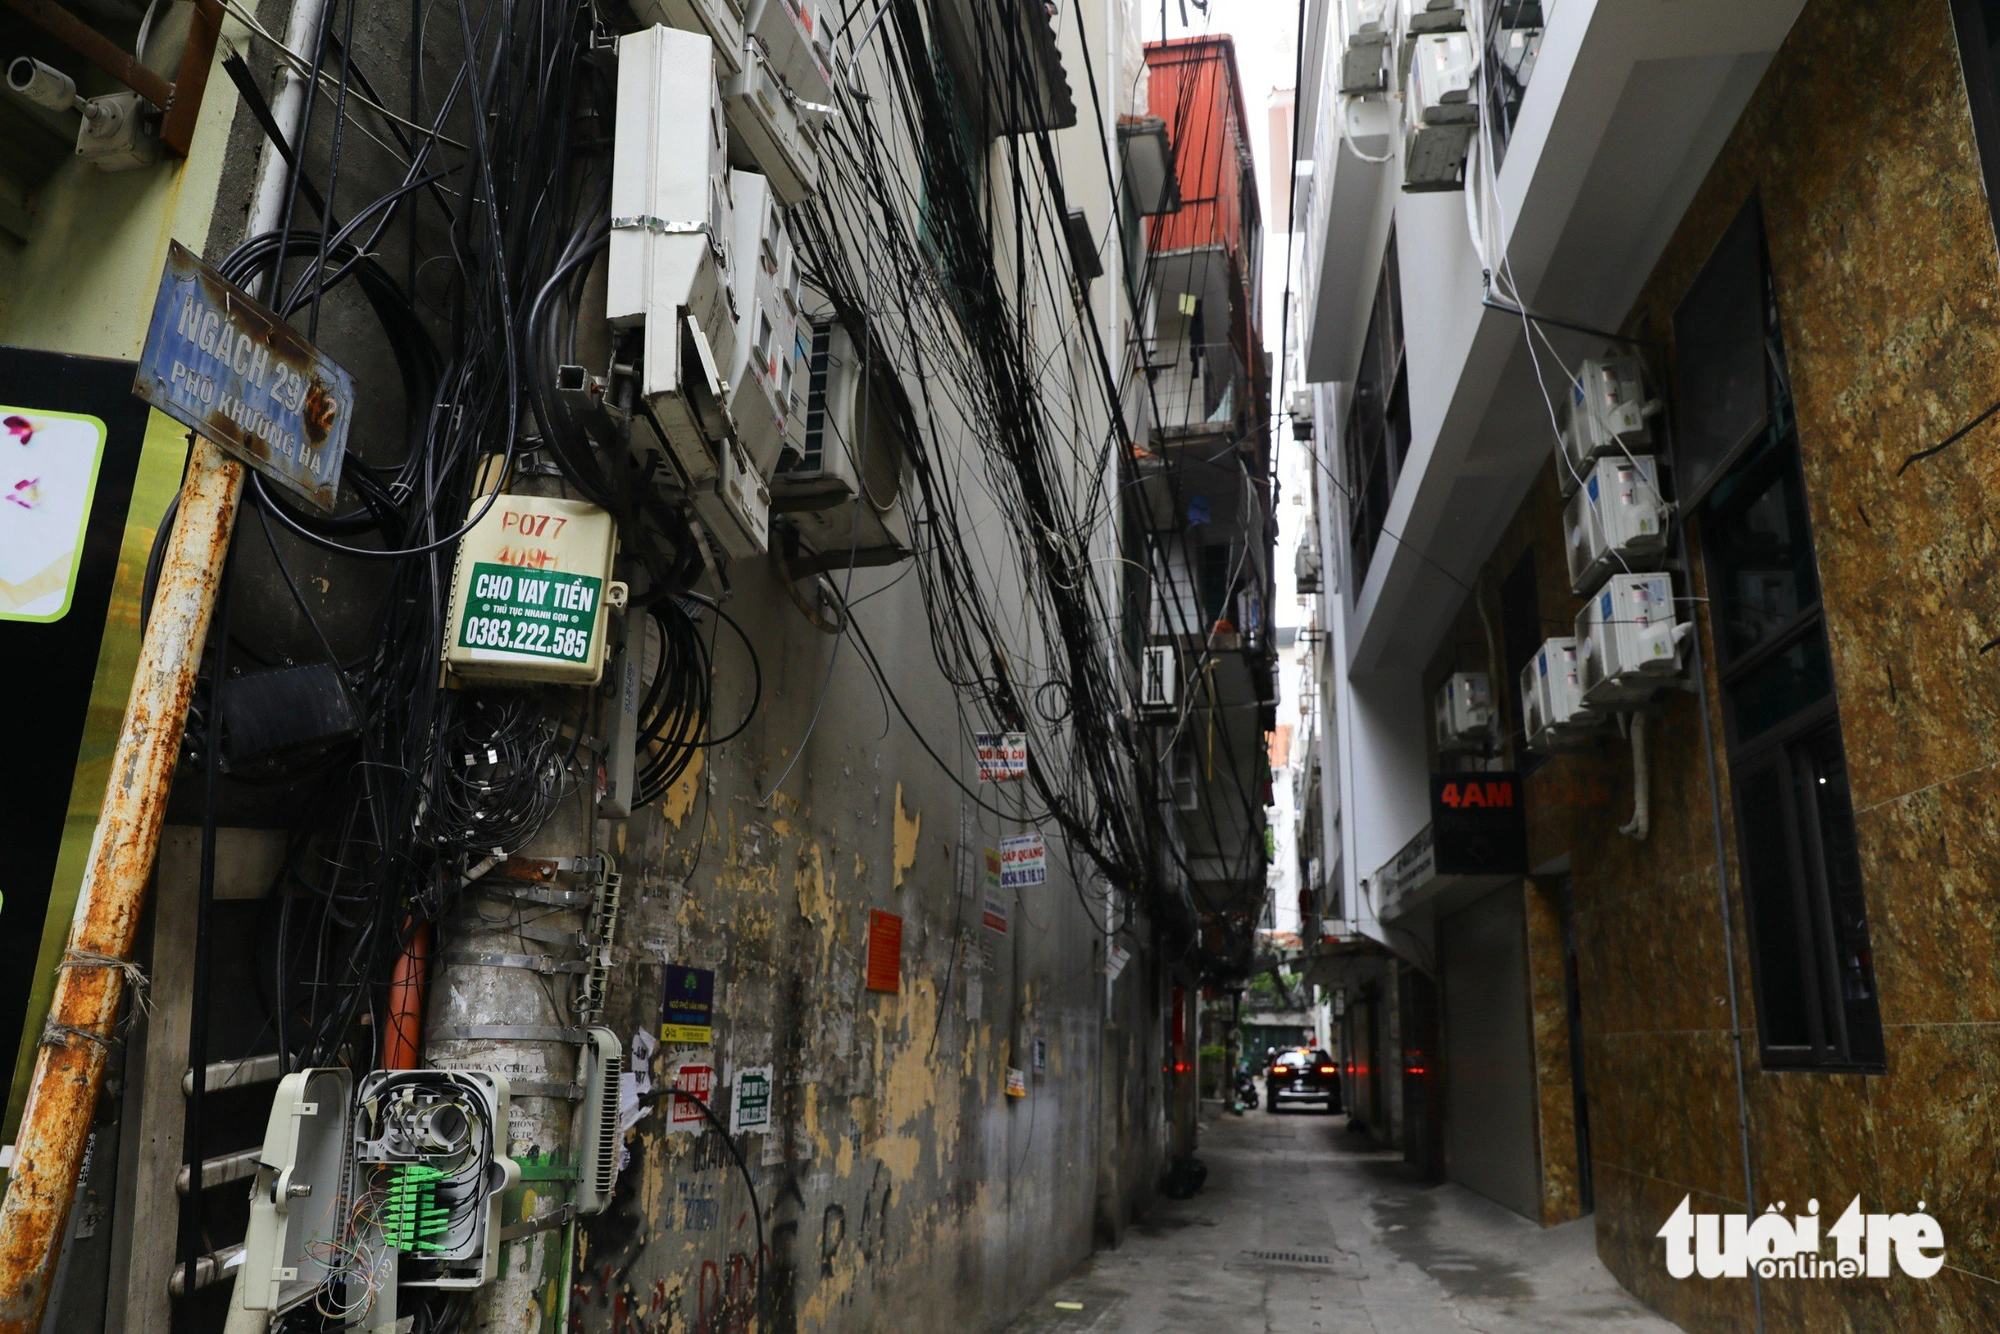 Many condenser units for air conditioners are installed outside an apartment block on a little alley on Khuong Ha Street in Hanoi. Photo: Danh Khang / Tuoi Tre